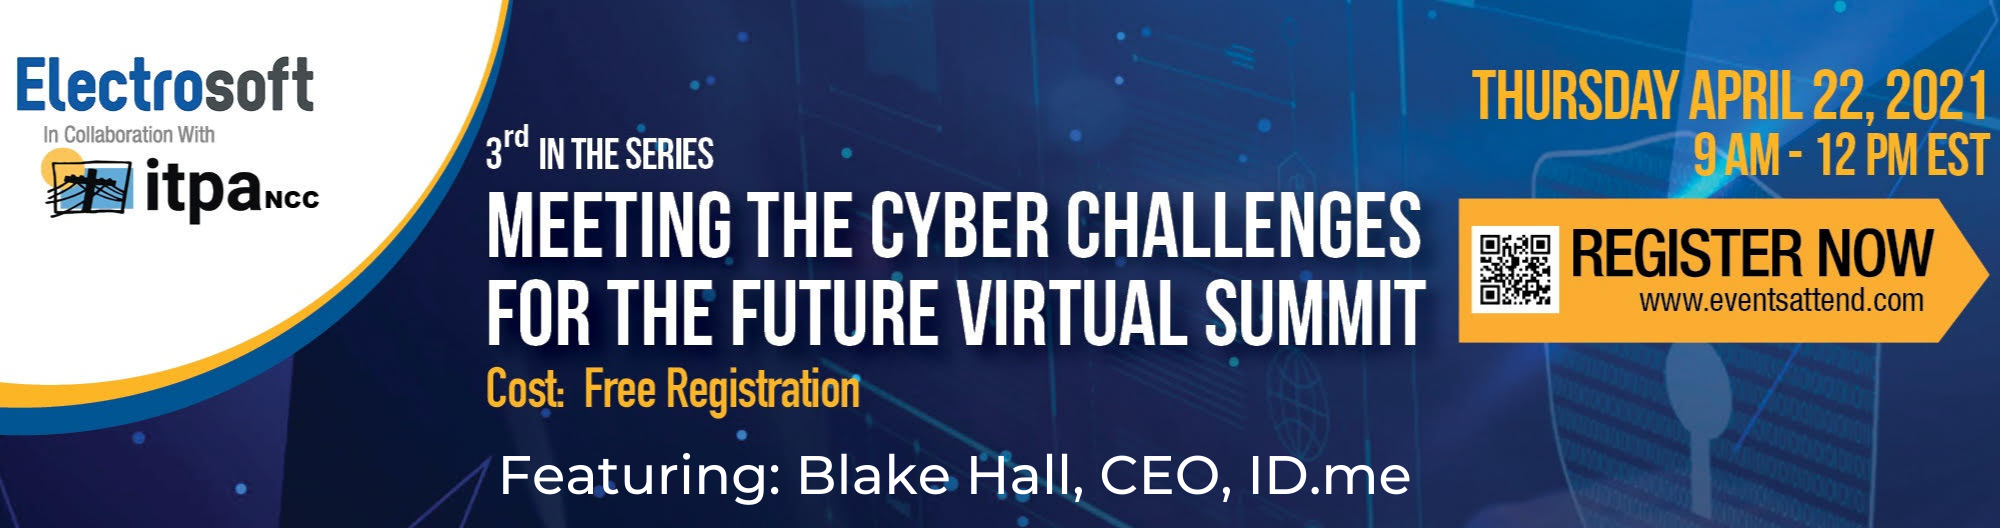 Meeting the Cyber Challenges for the Future webinar